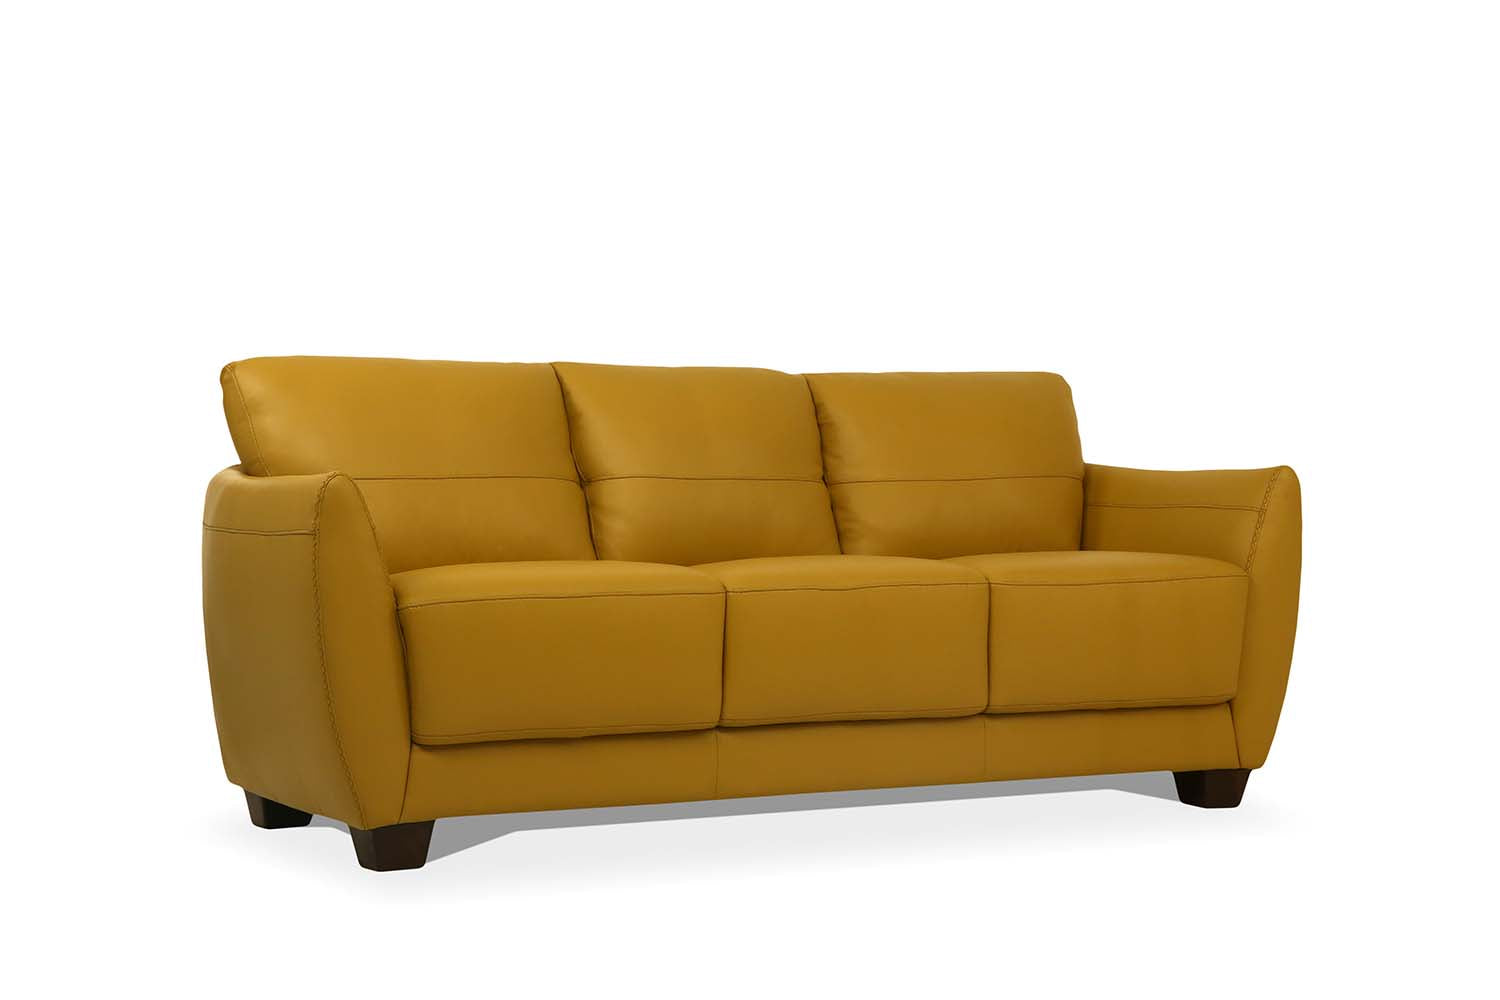 ACME Furniture Sofas & Couches - Sofa, Mustard Leather 54945